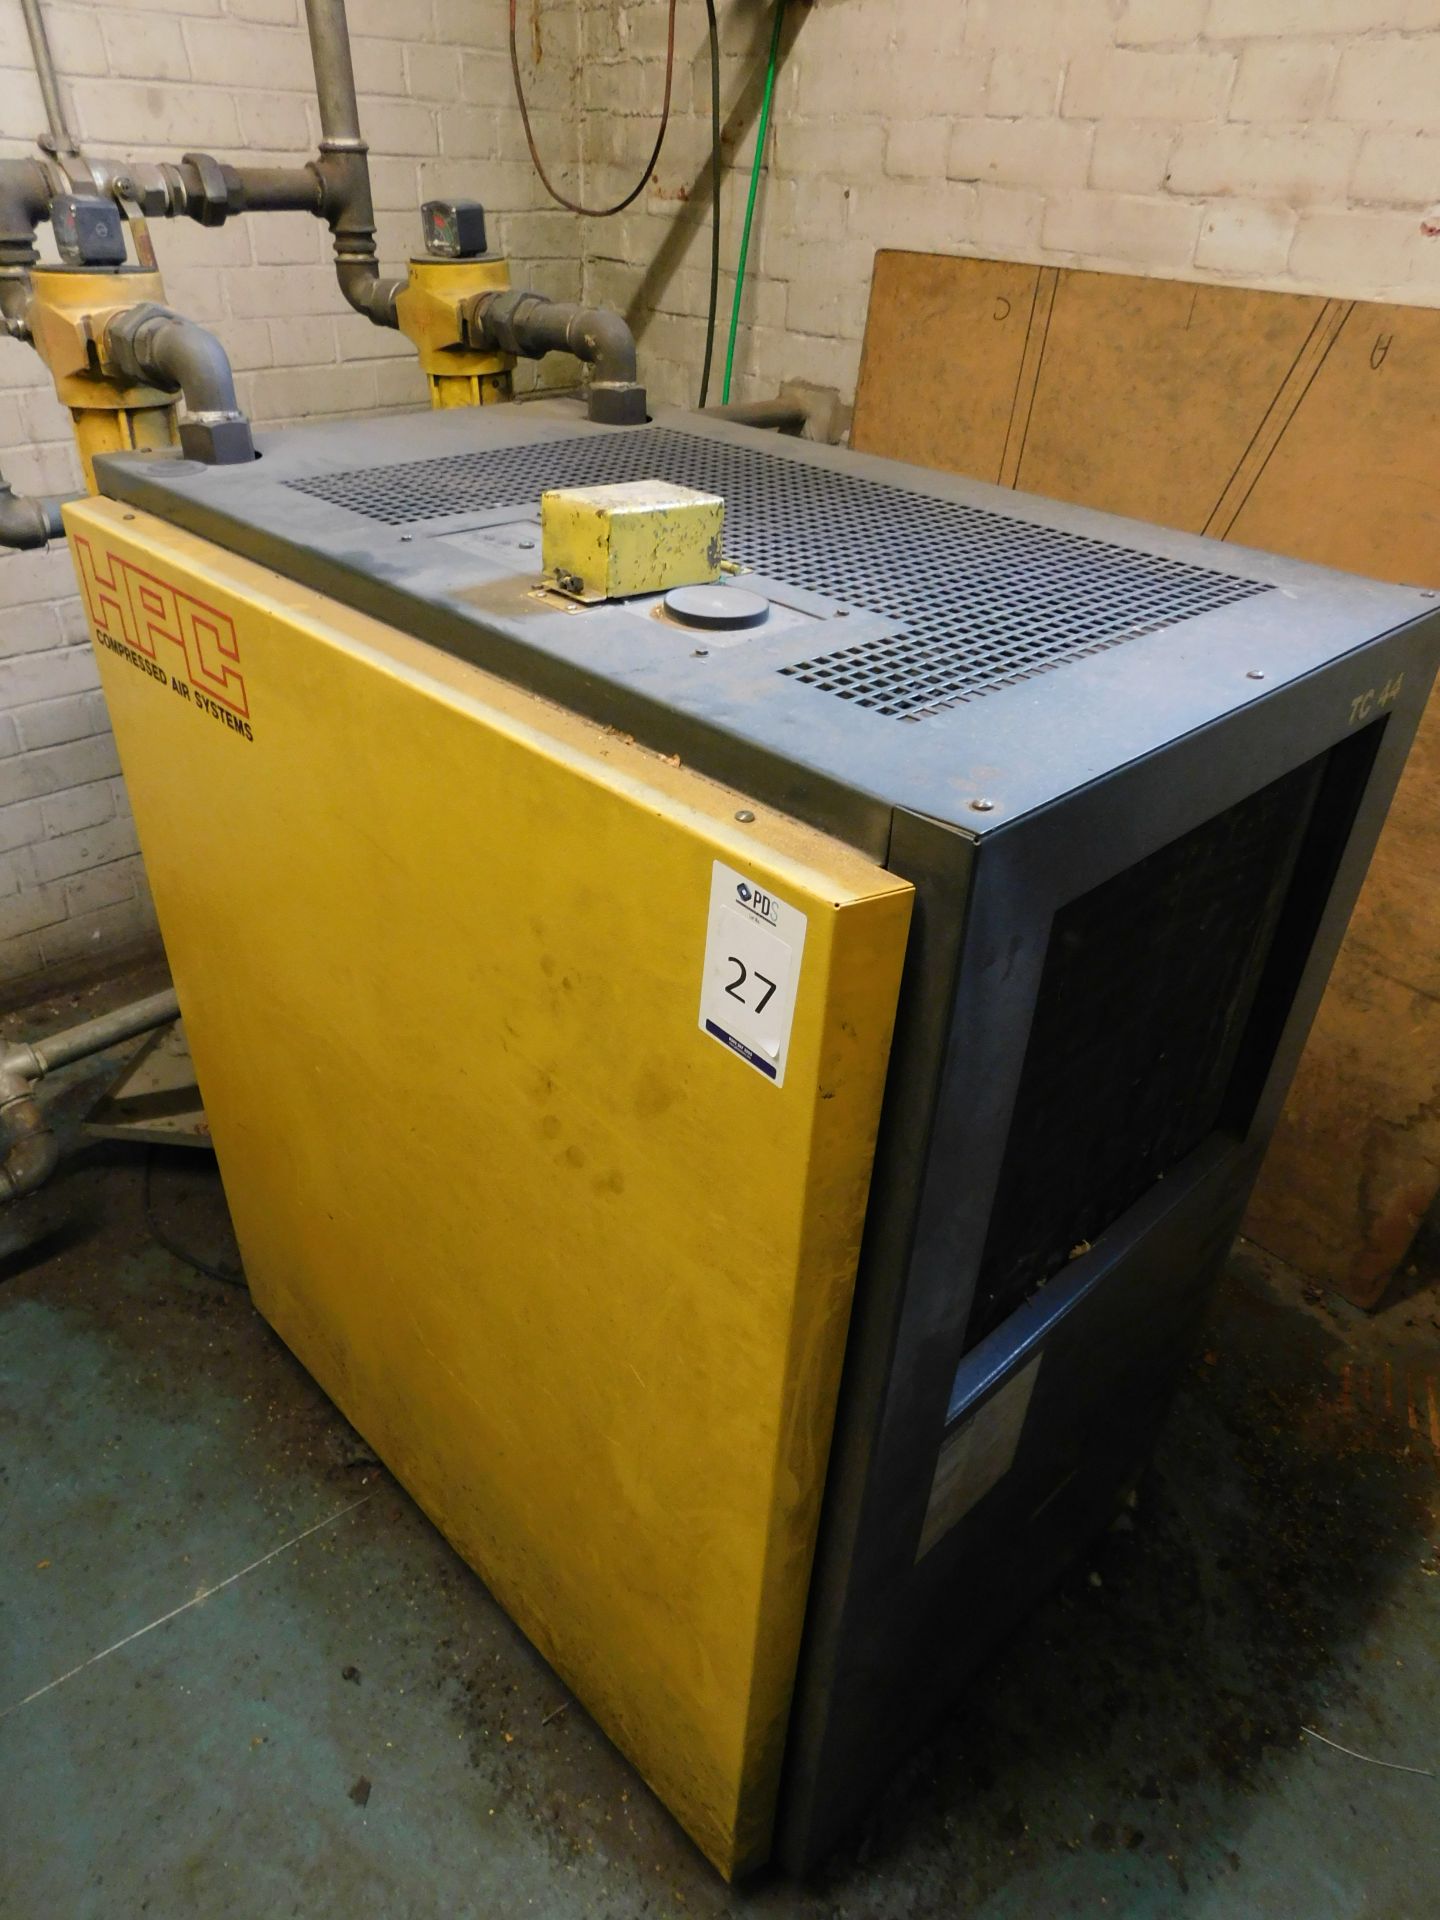 Kaeser Type TC 44 Refrigerated Dryer (Location: Kettering - See General Notes for Details)